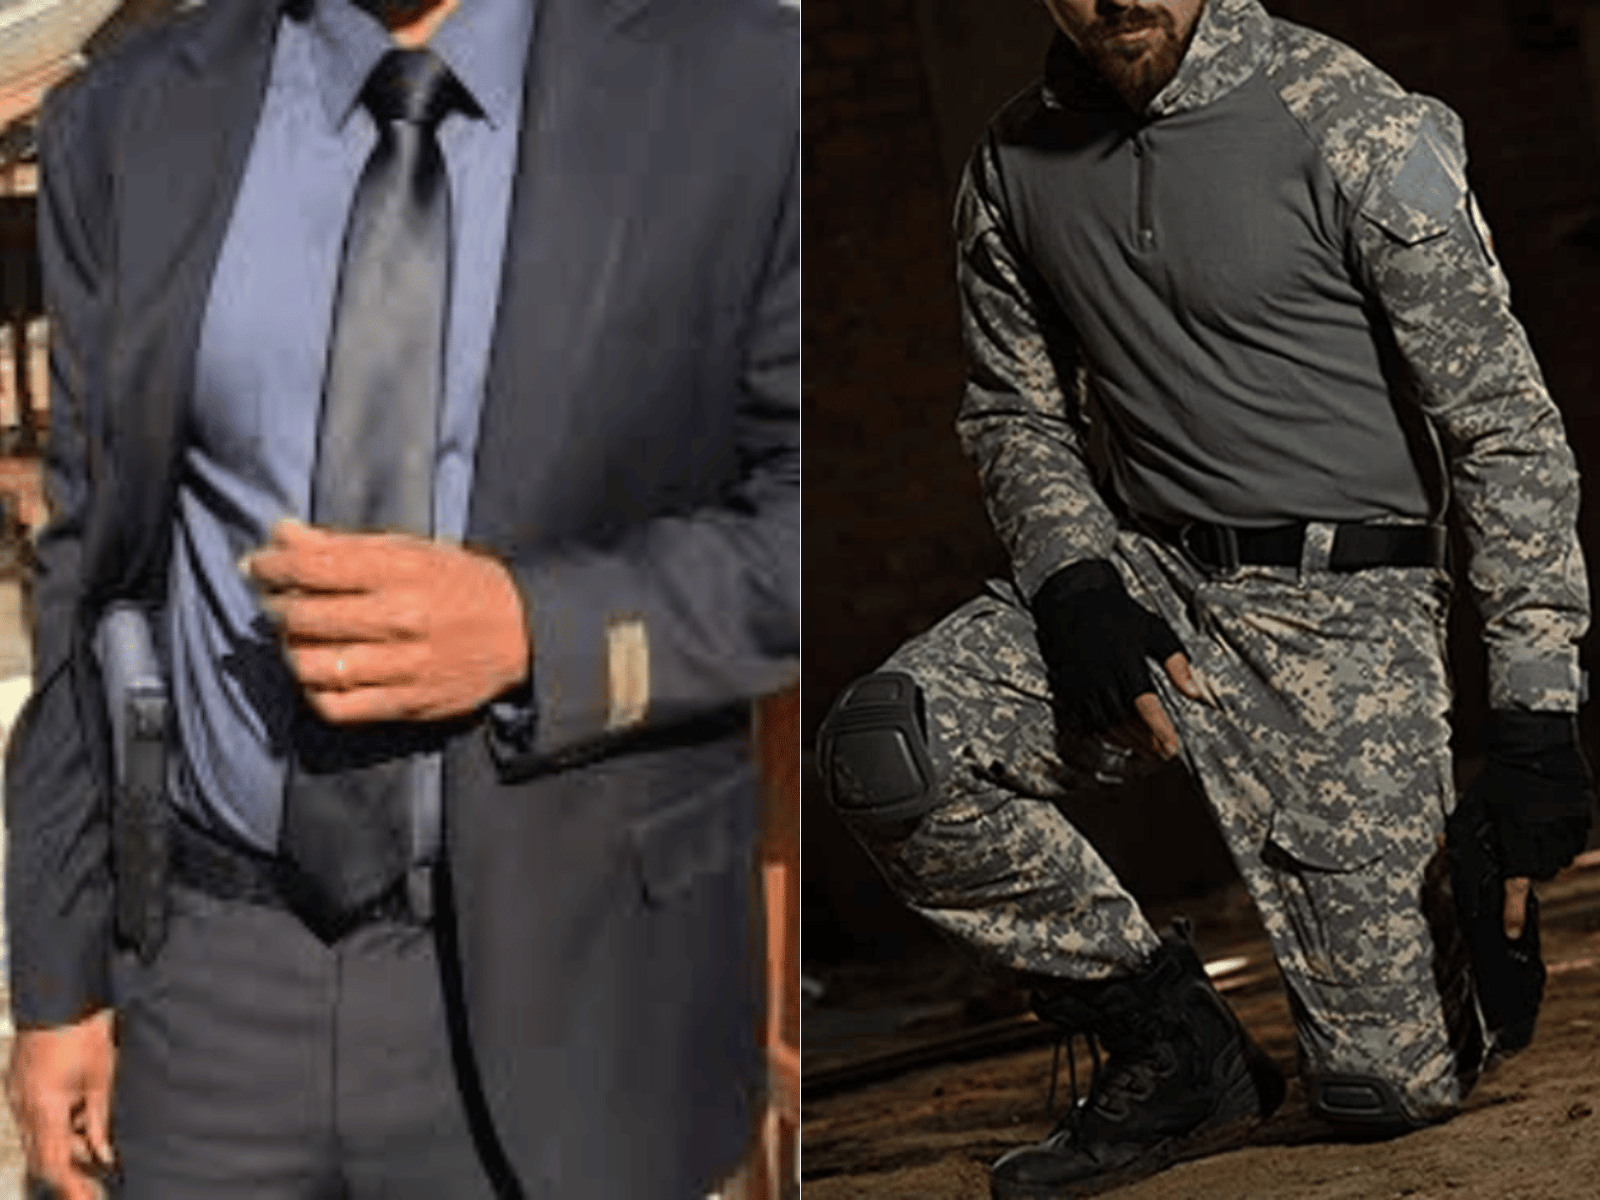 A tactical suit for formal wear and one for combat, camo with kneepads and a military belt and hiking boots.